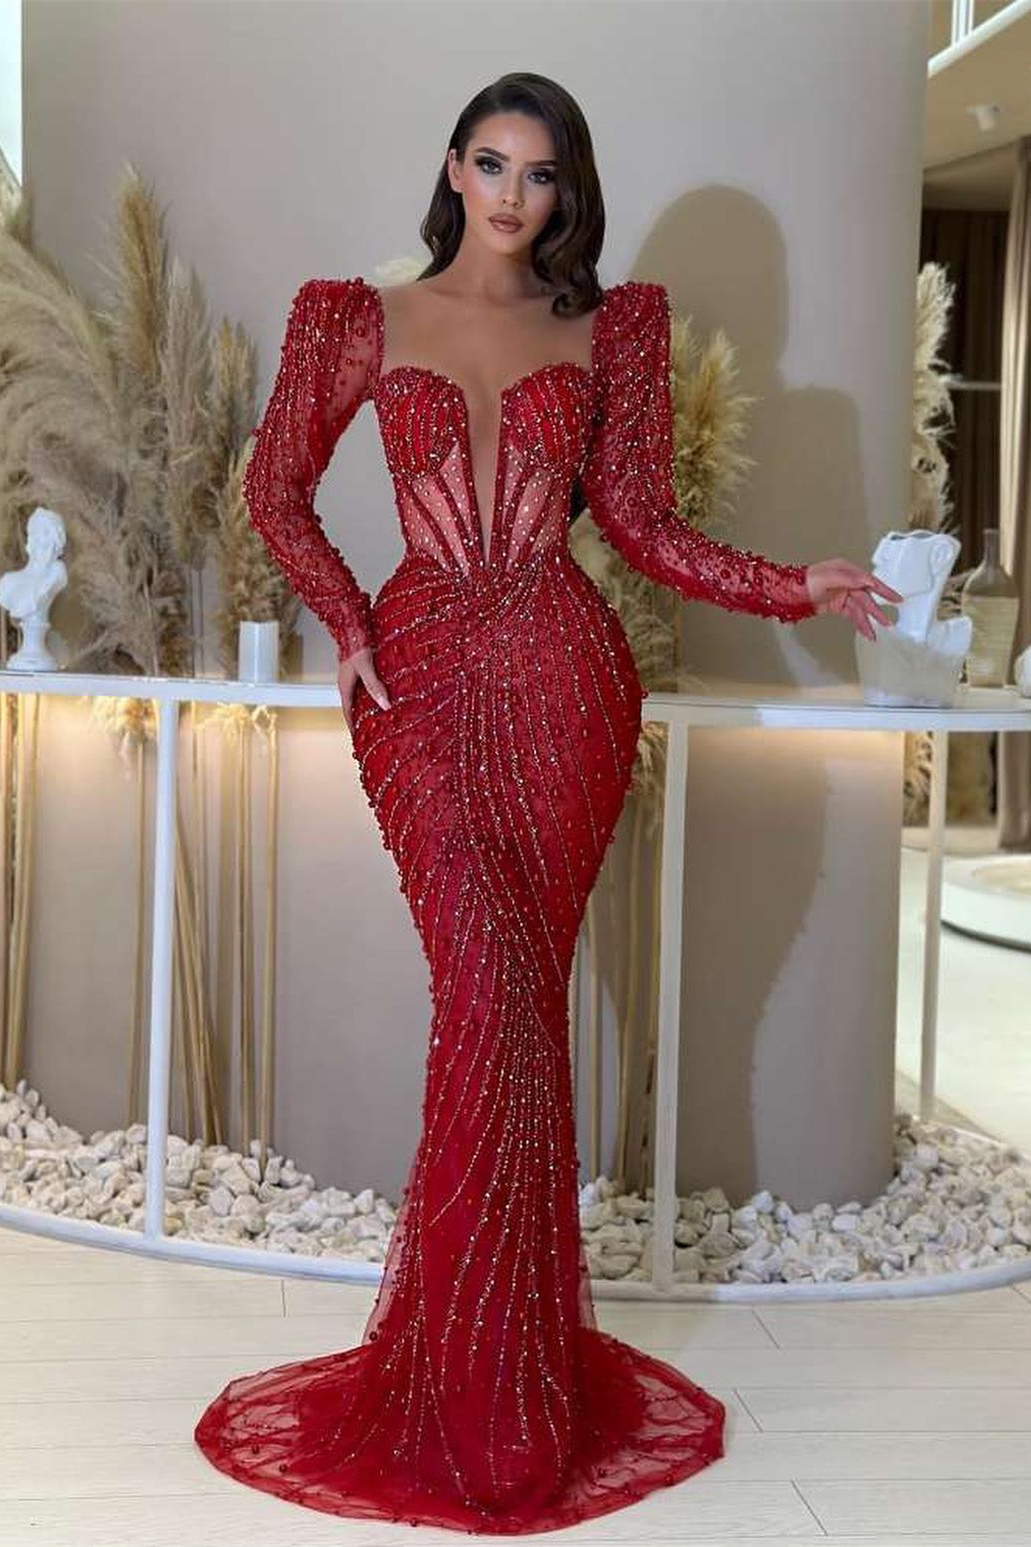 Luluslly Red Deep V-Neck Long Sleeves Mermaid Prom Dress With Beaded Sequins